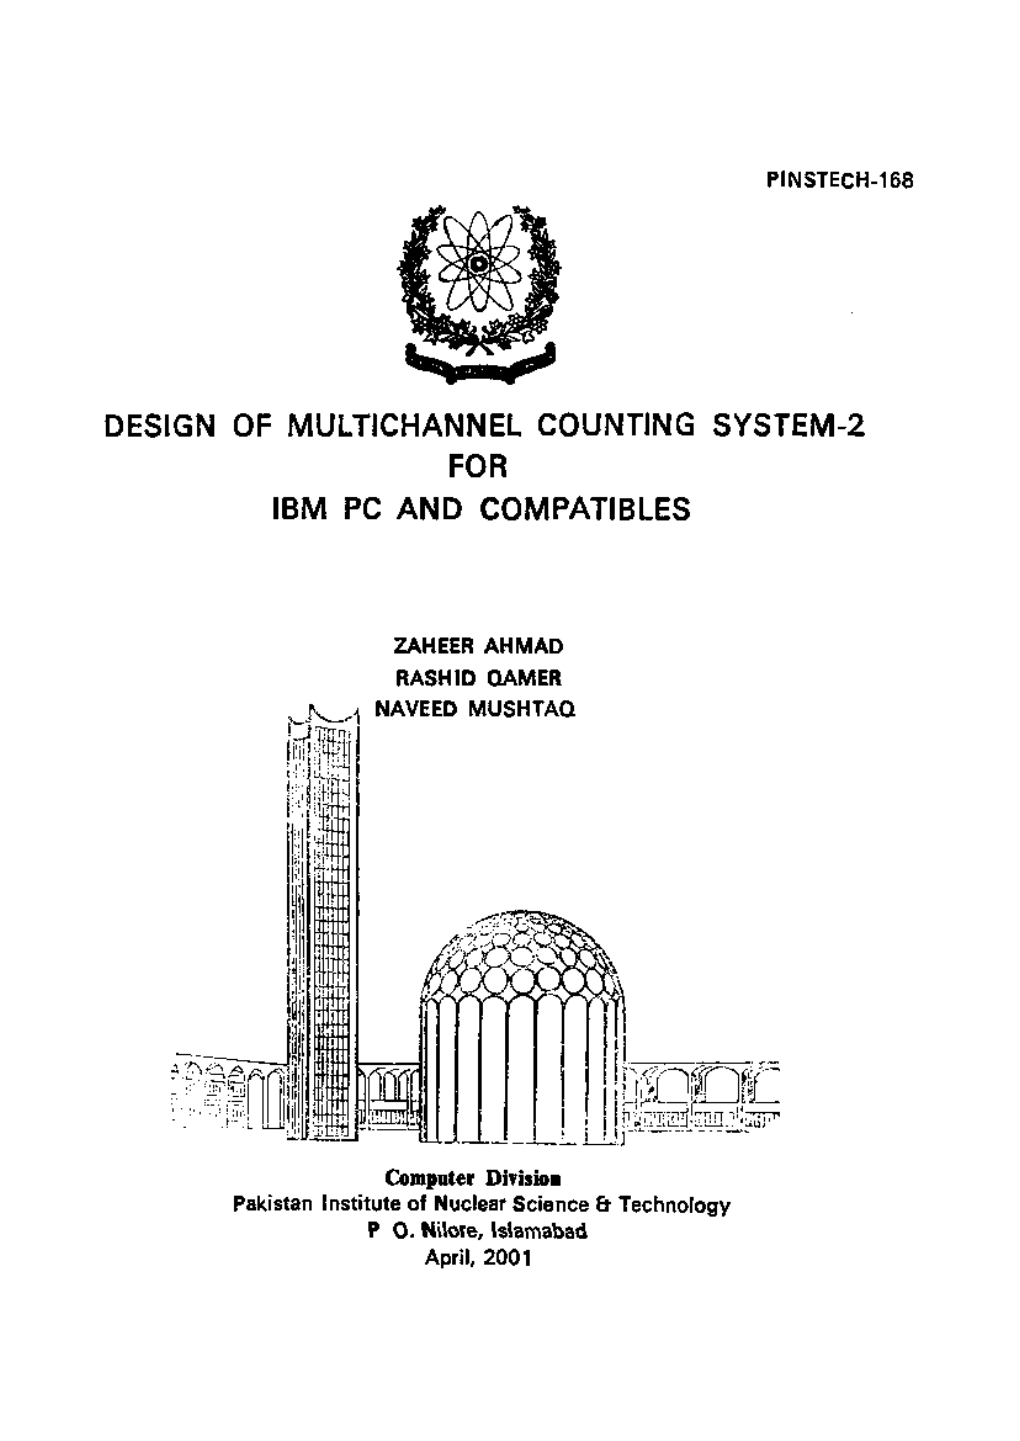 Design of Multichannel Counting System-2 for Ibm Pc and Compatibles